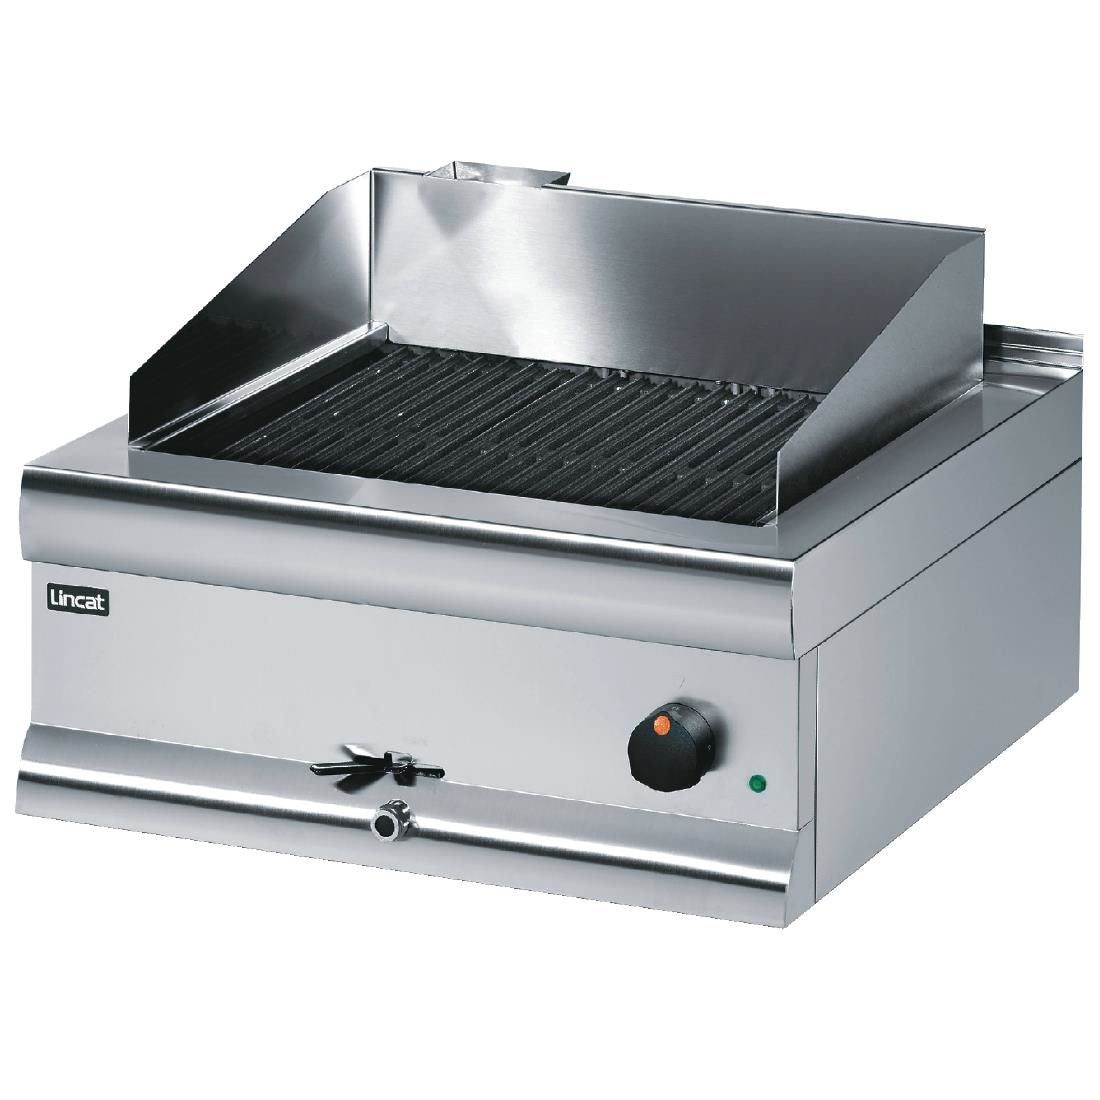 ECG6 - Lincat Silverlink 600 Electric Counter-top Chargrill - W 600 mm - 8.0 kW JD Catering Equipment Solutions Ltd